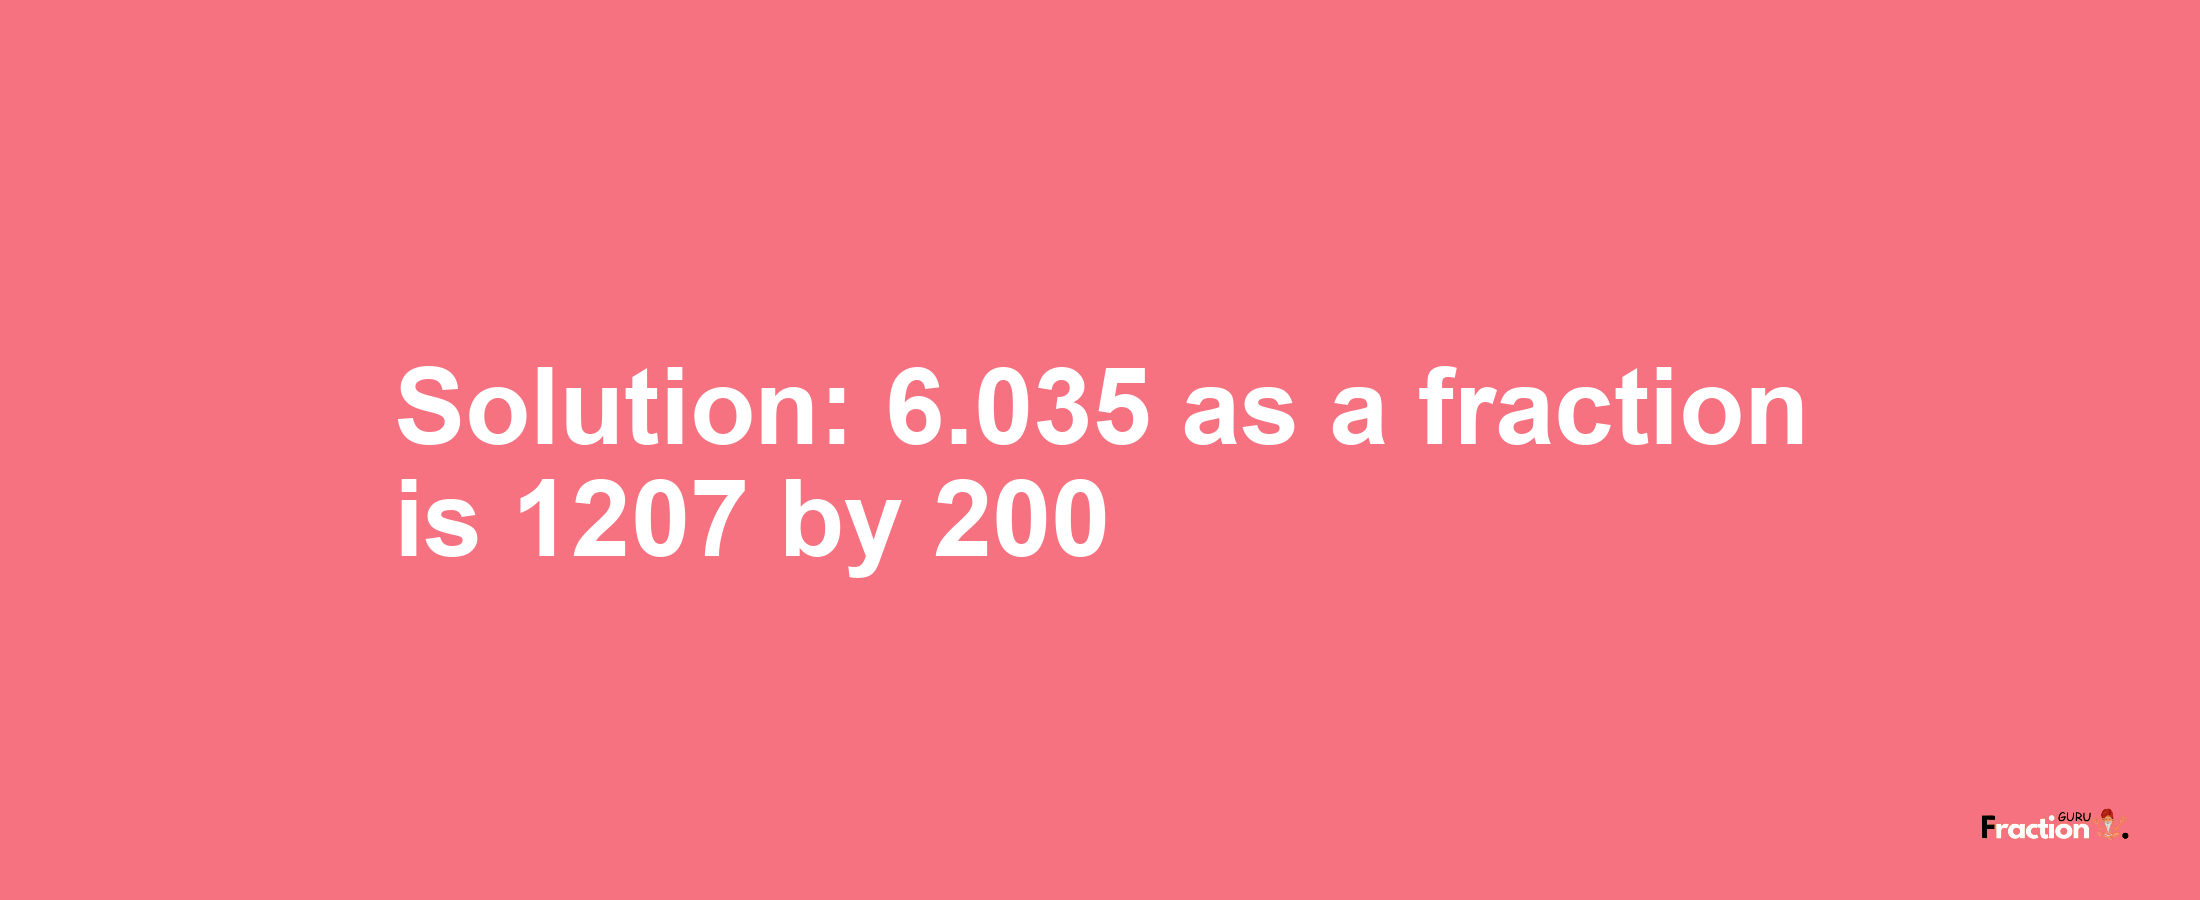 Solution:6.035 as a fraction is 1207/200